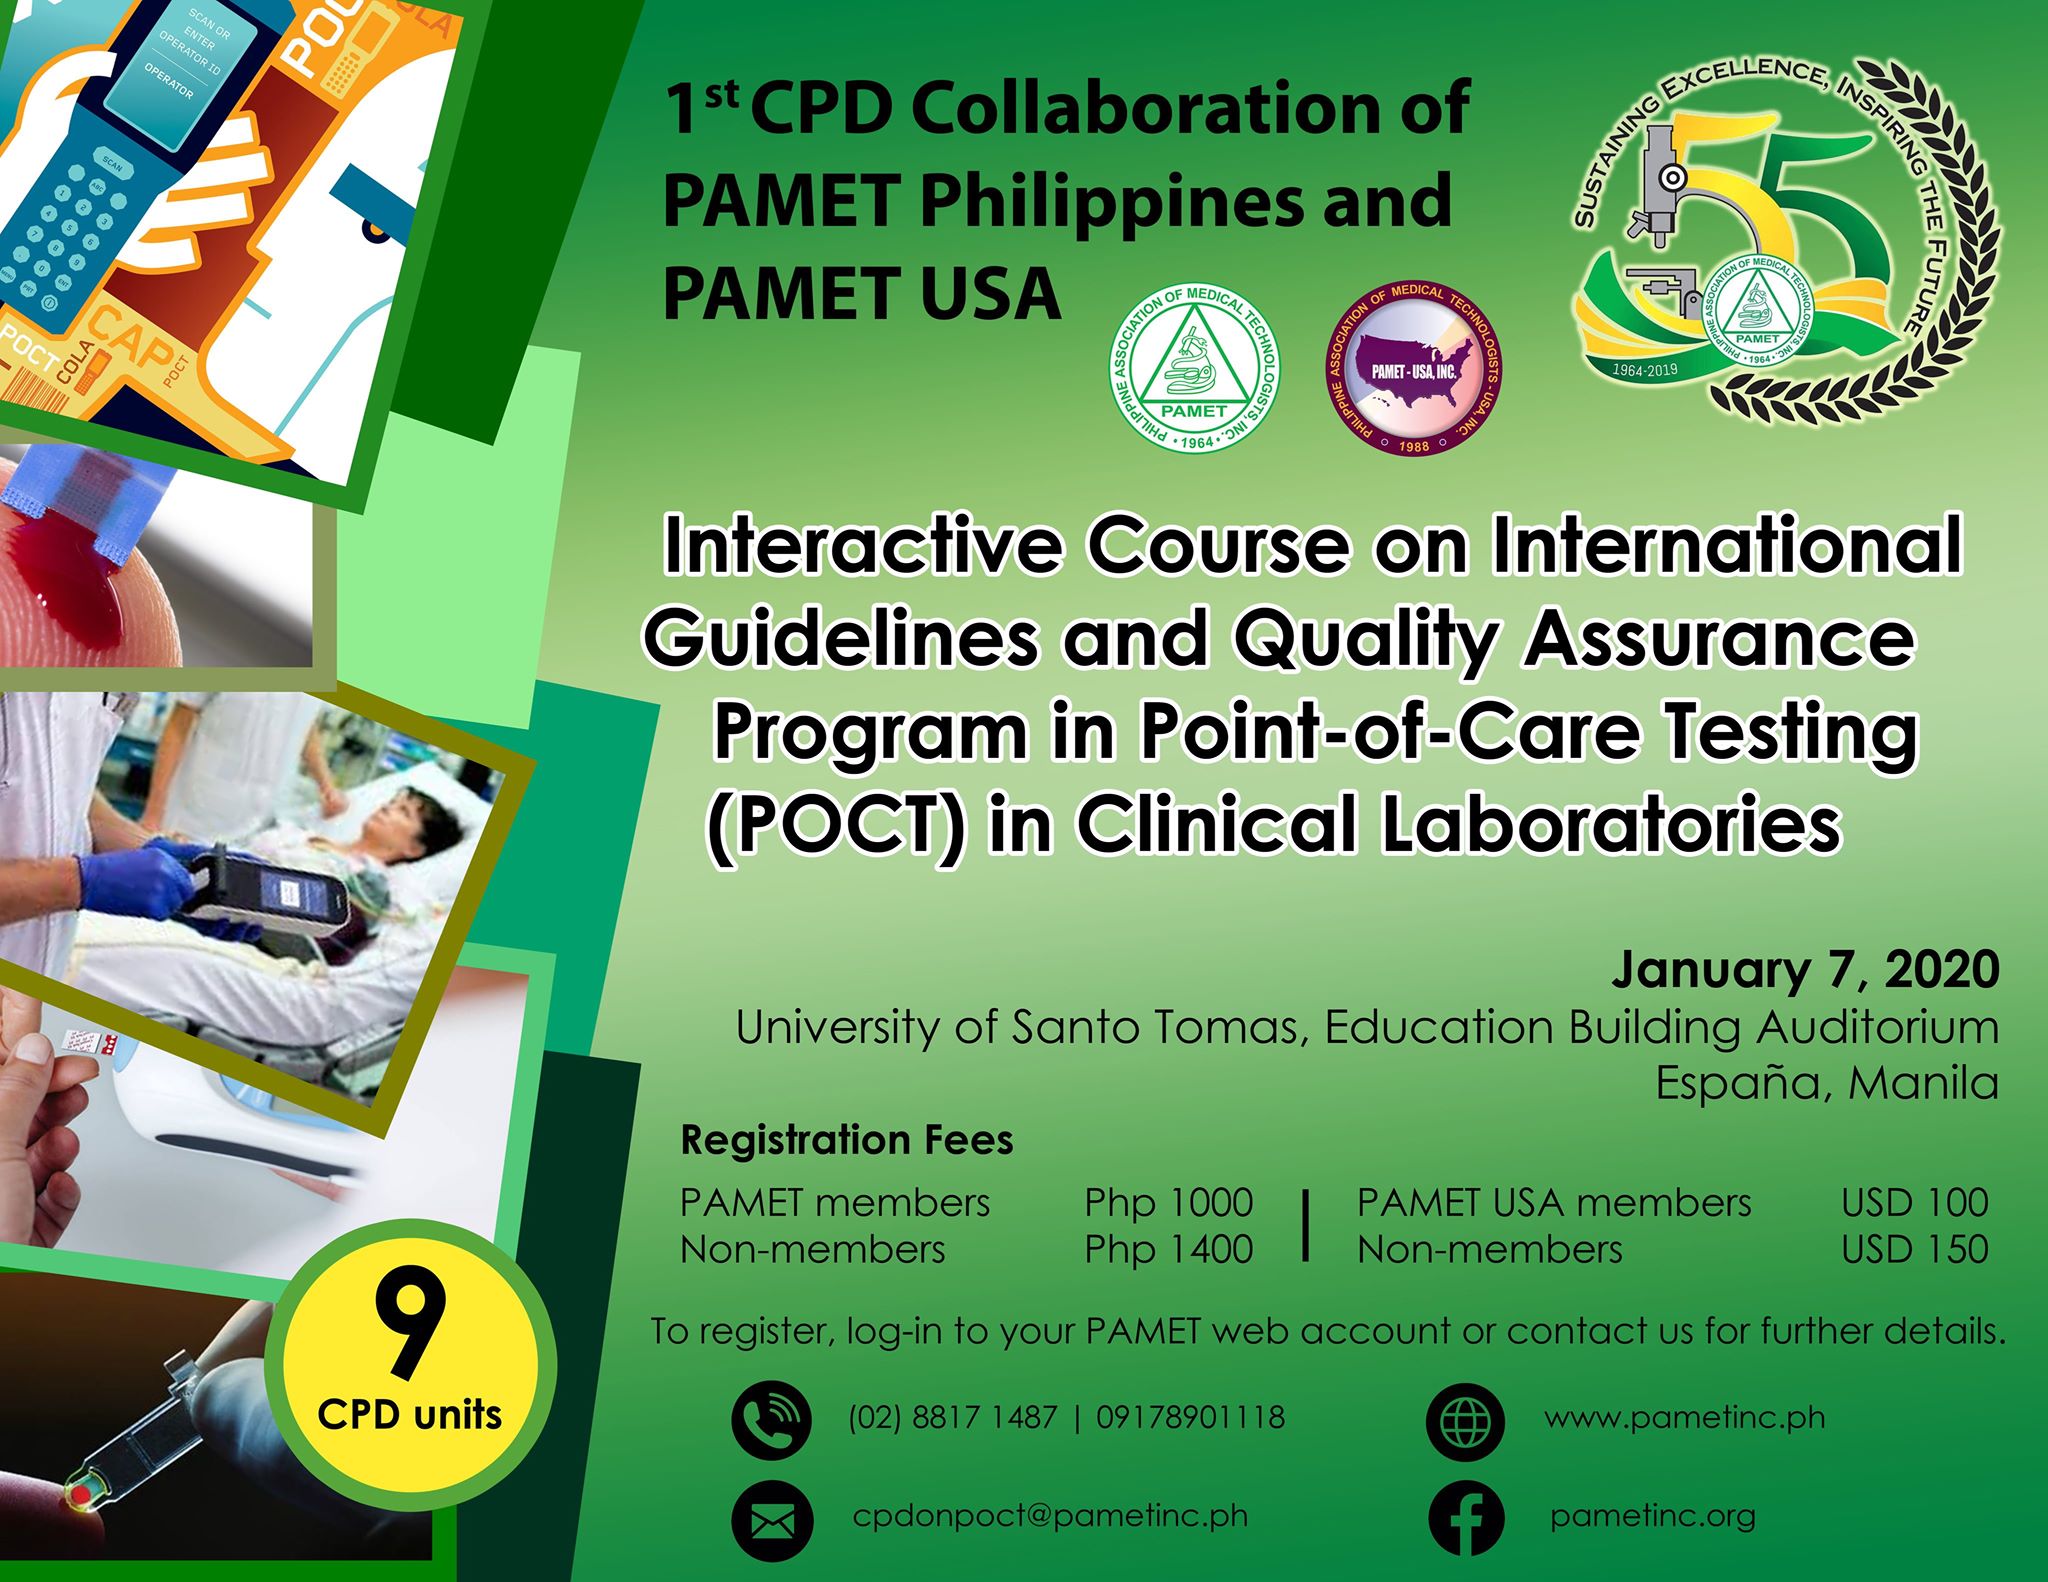 1st CPD Collaboration of PAMET Philippines and PAMET USA